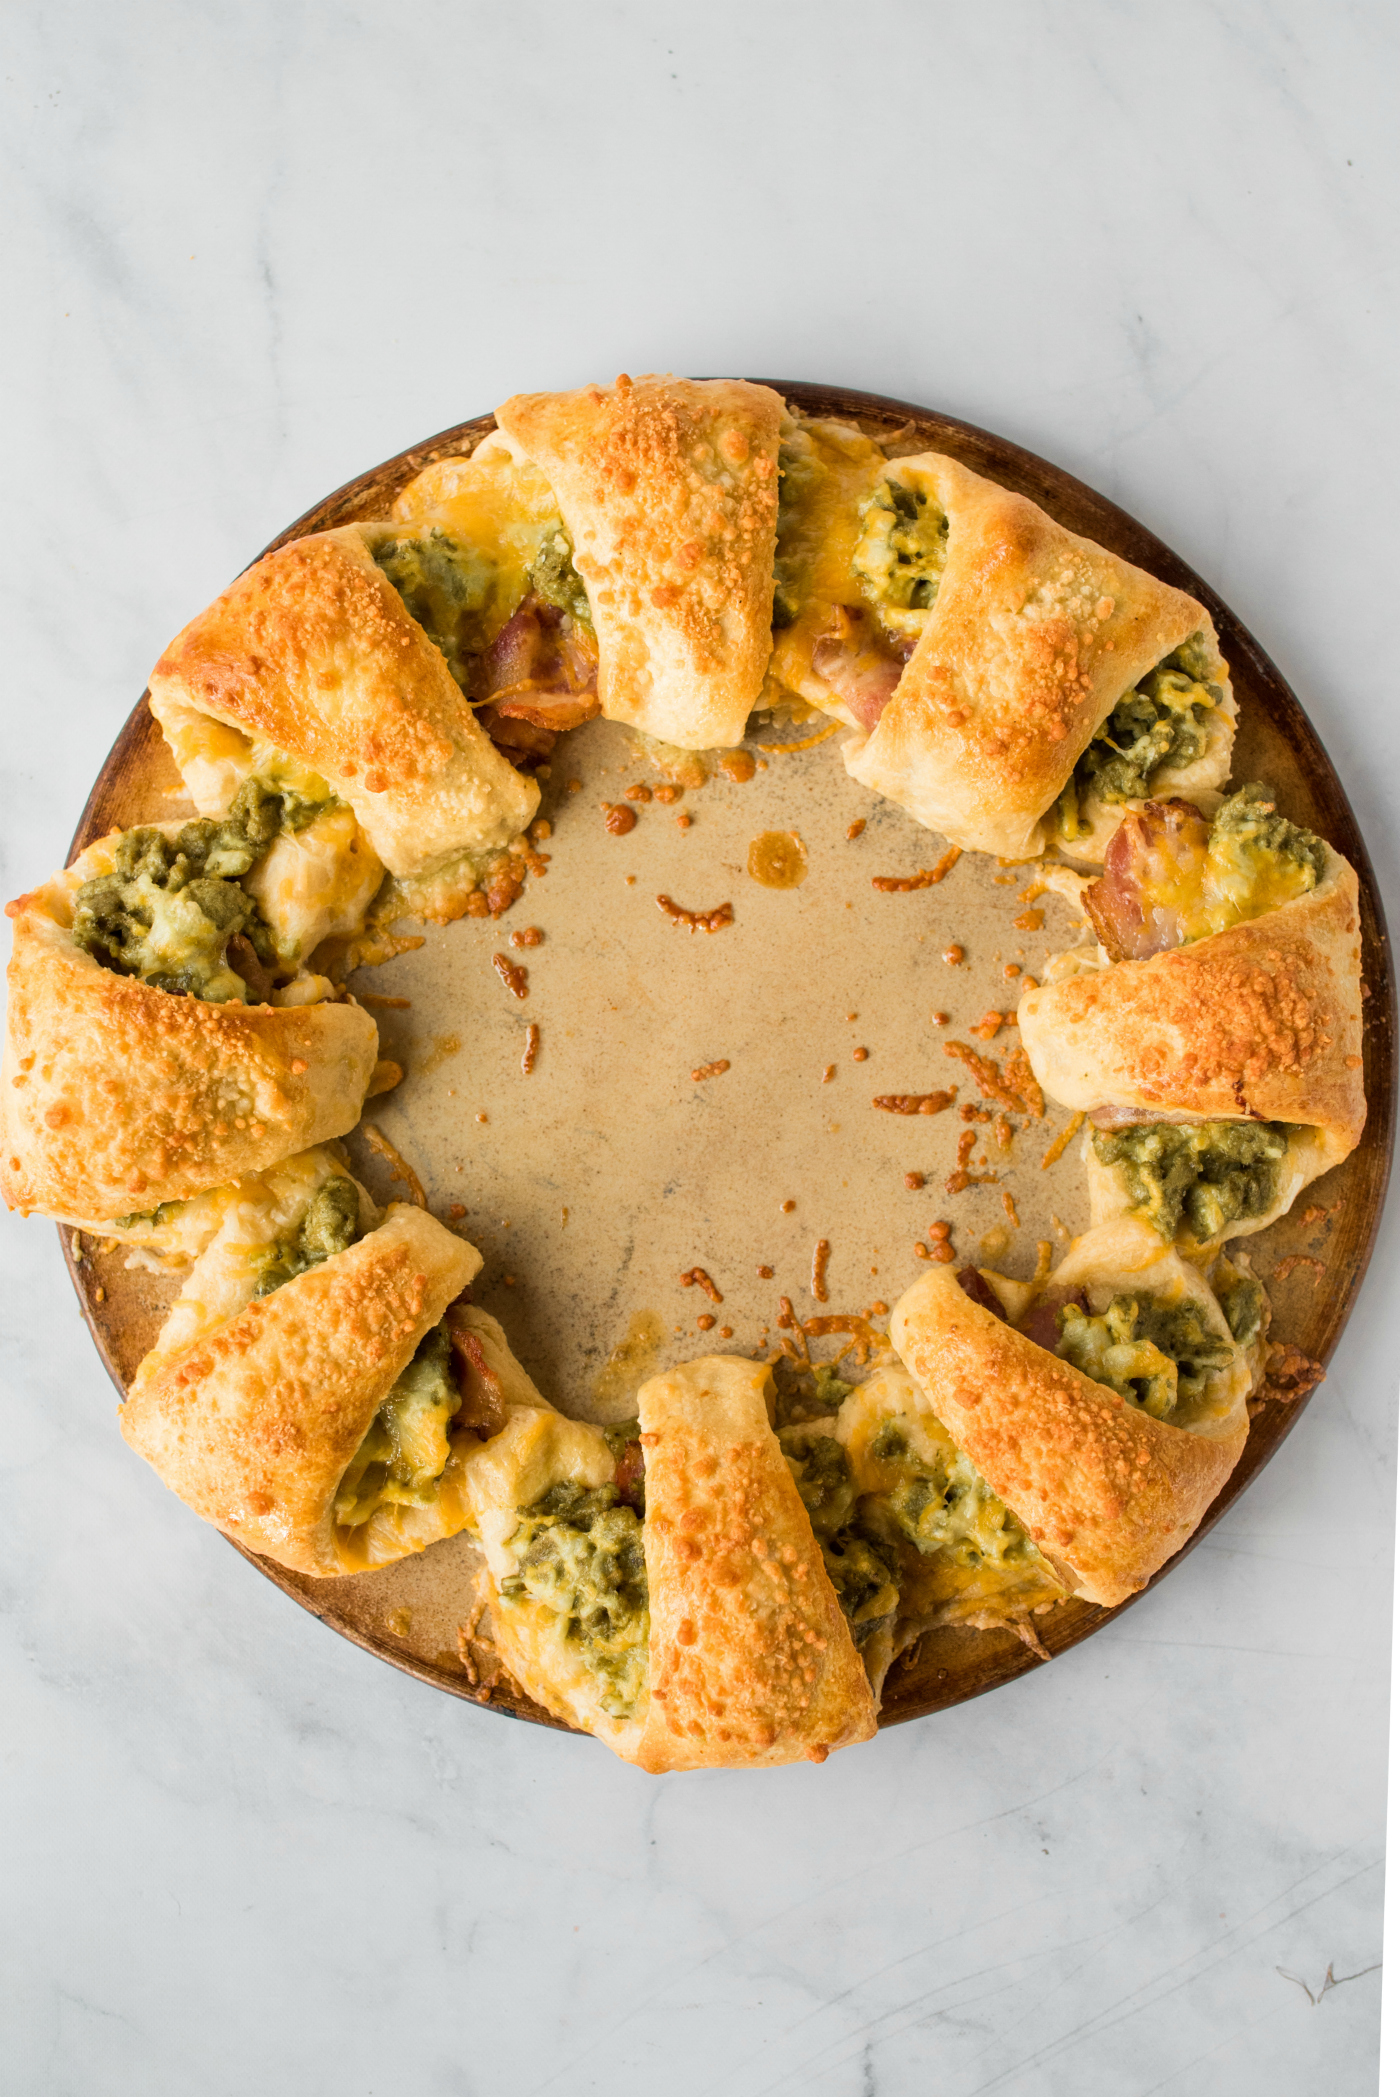 Old Fashioned Home Cookin' Recipes - Breakfast Crescent Ring!!!  Recipe:https://buff.ly/3uvKDCI This sunny breakfast crescent ring is a  delicious way to greet a new day. Flaky crescent rolls, melty cheese,  fluffy eggs, and